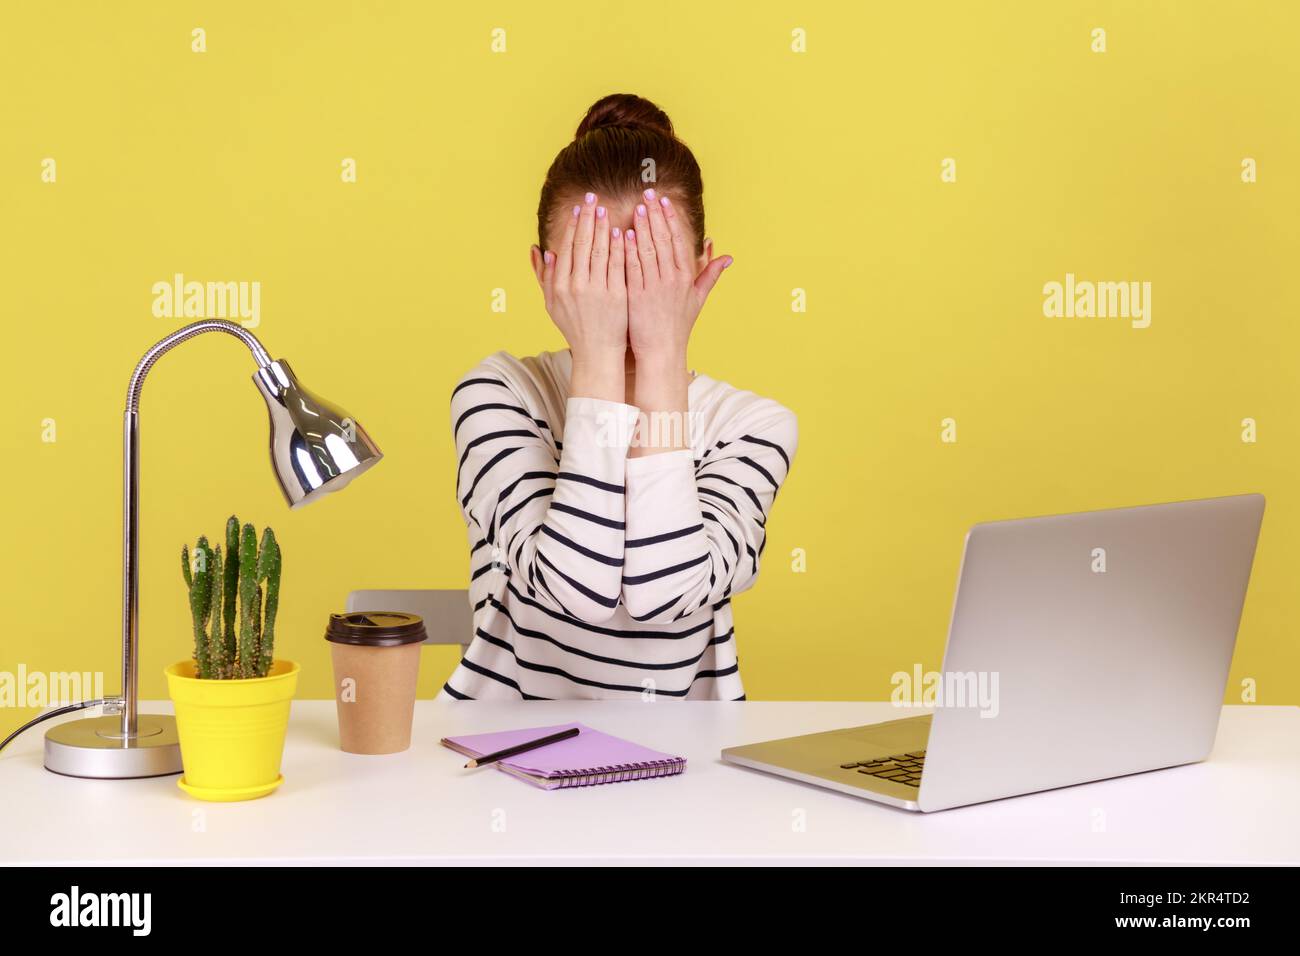 Don't want to see. Excited woman closing eyes with hand, avoid watching something shameful, working from home office. Indoor studio studio shot isolated on yellow background. Stock Photo